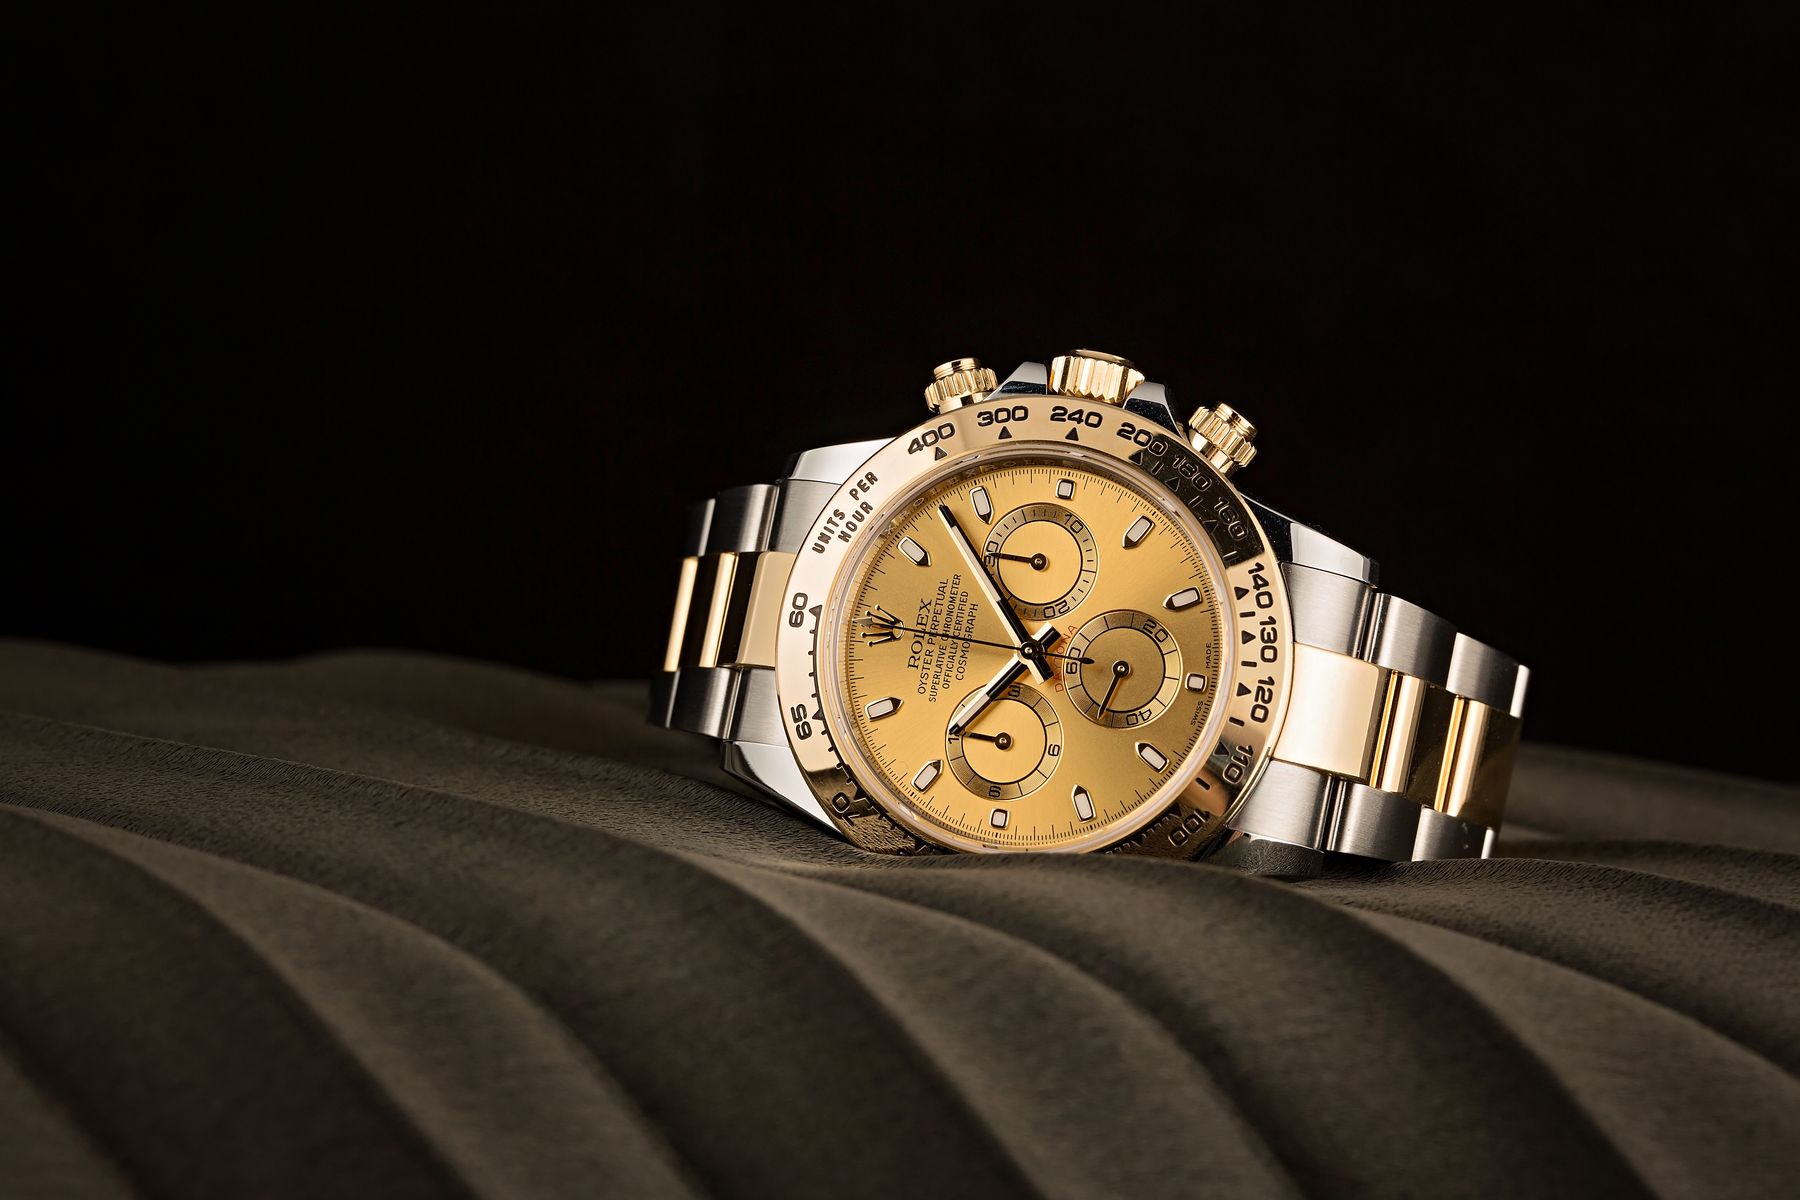 Rolex Daytona 116503 vs 116523 Comparison Stainless Steel and Yellow Gold